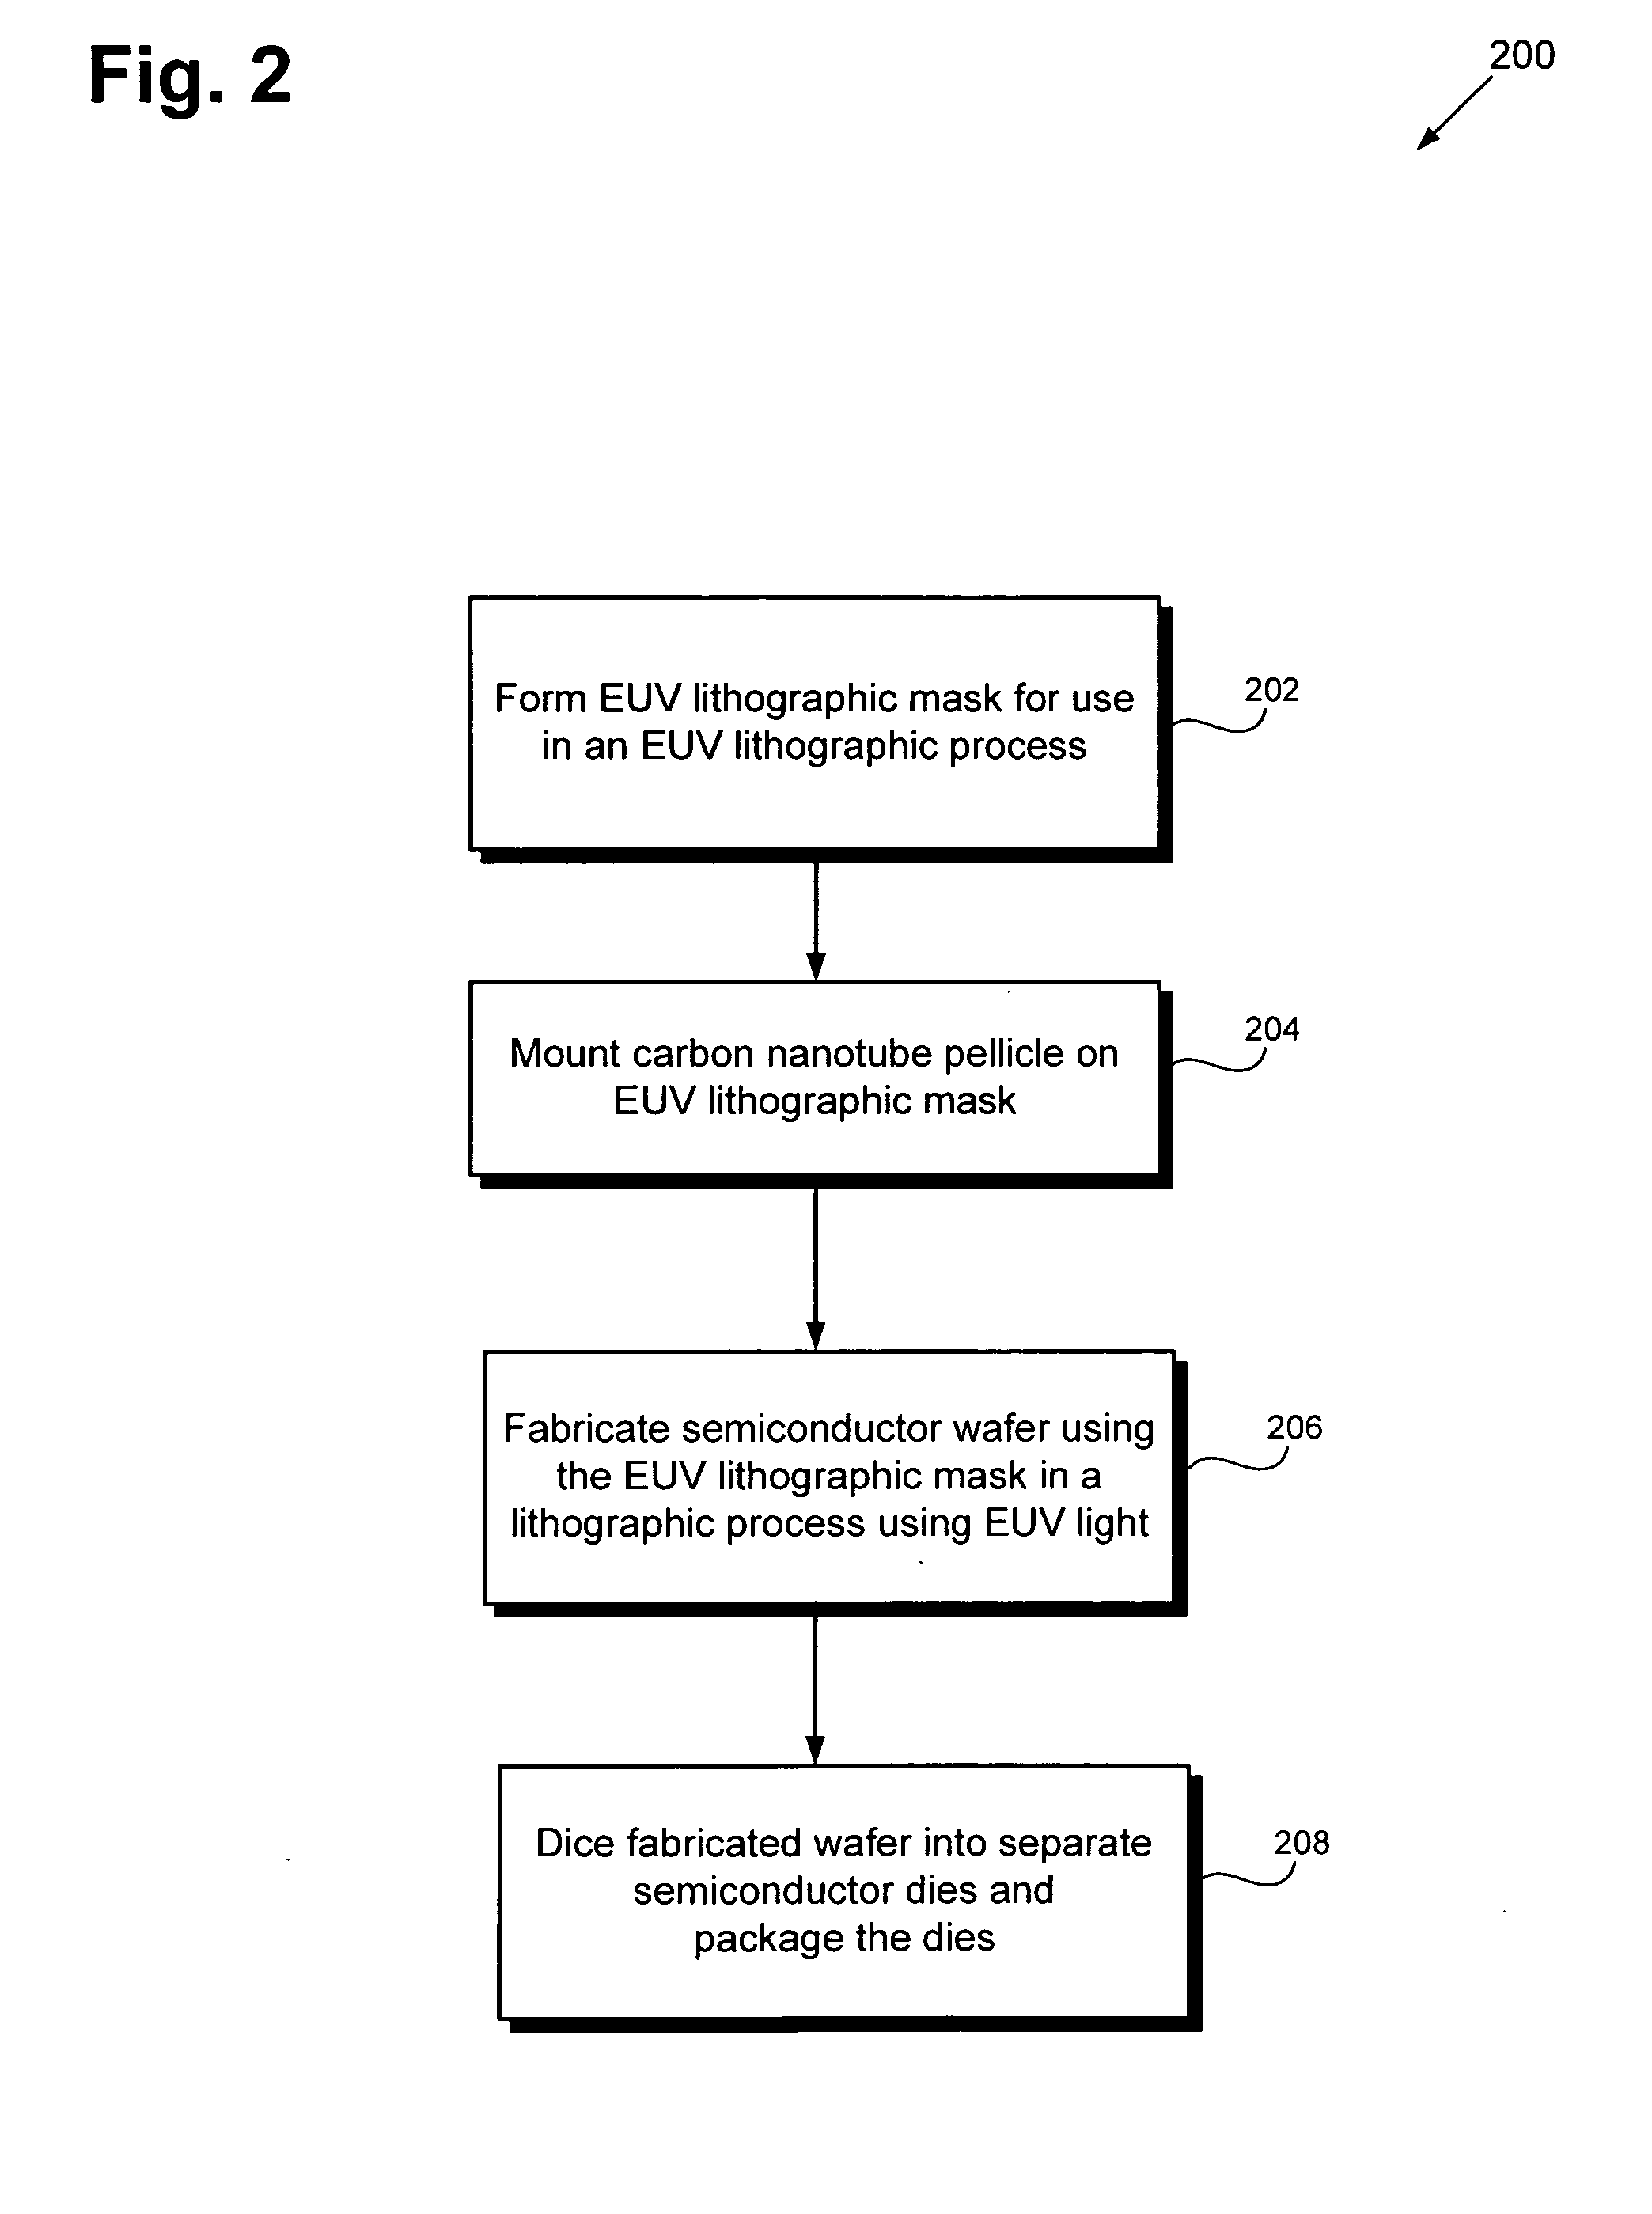 EUV pellicle and method for fabricating semiconductor dies using same